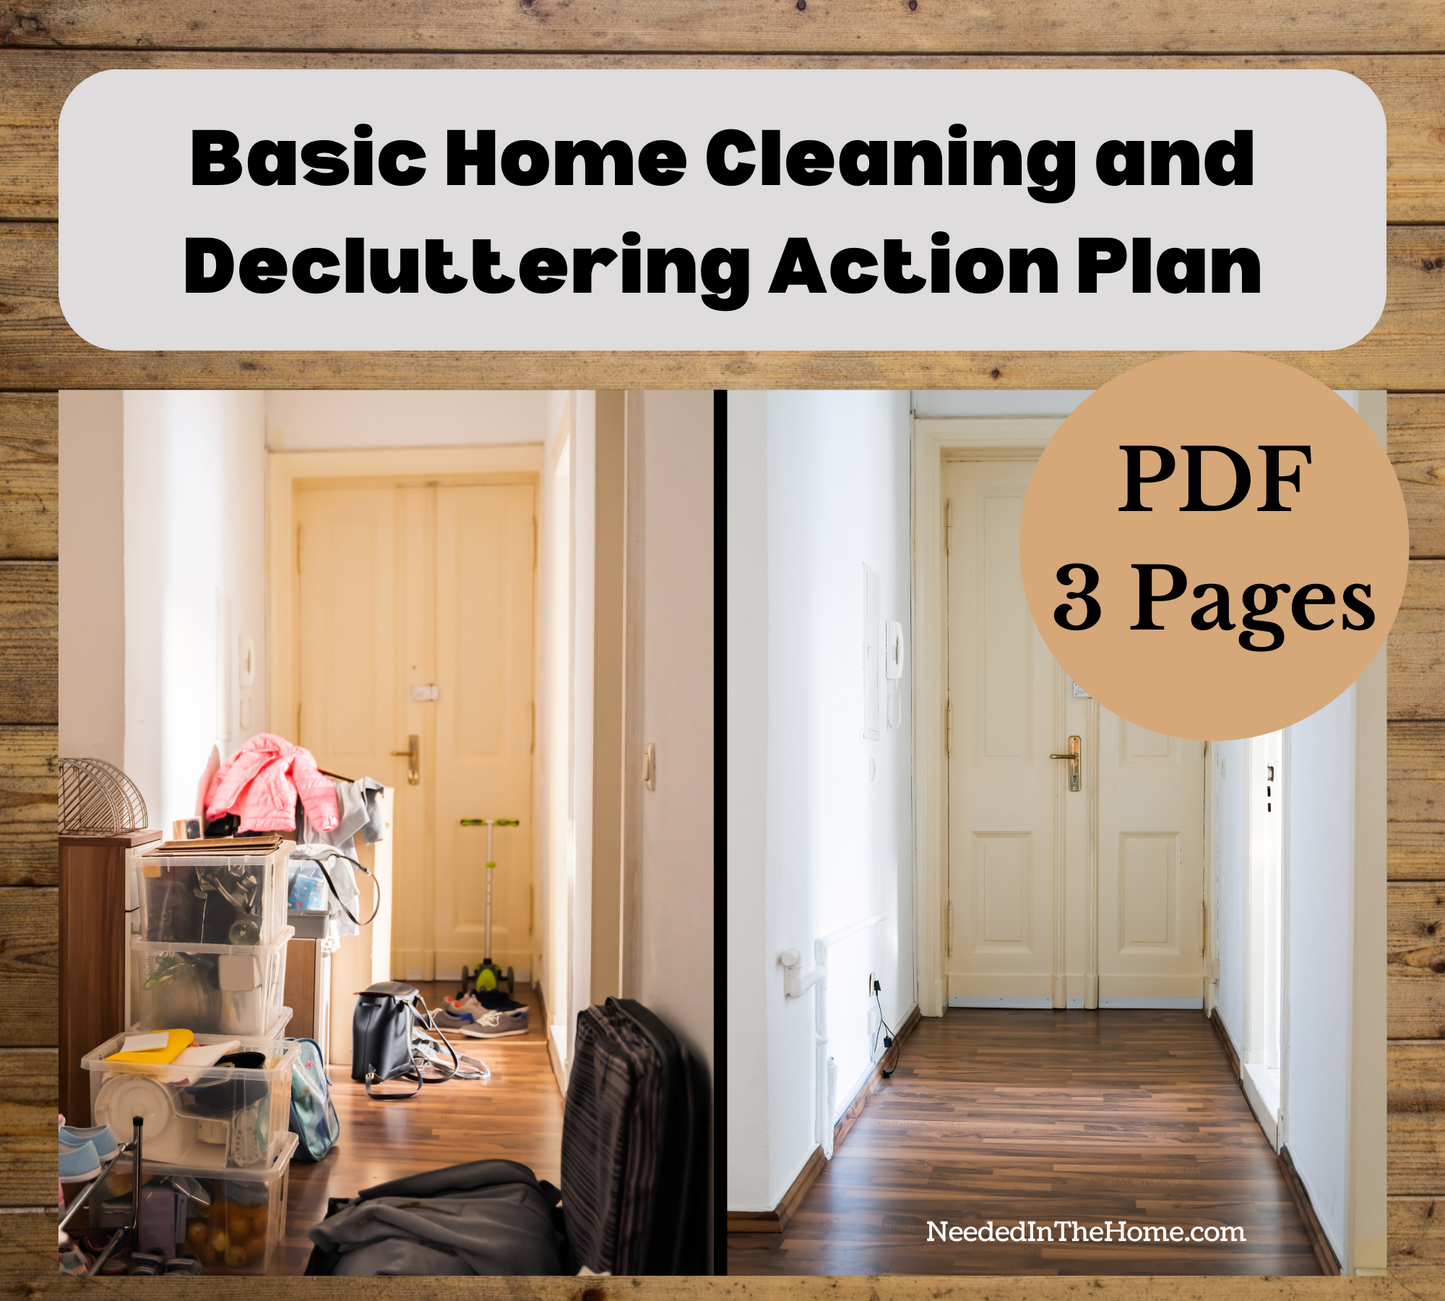 Basic Home Cleaning and Decluttering Action Plan